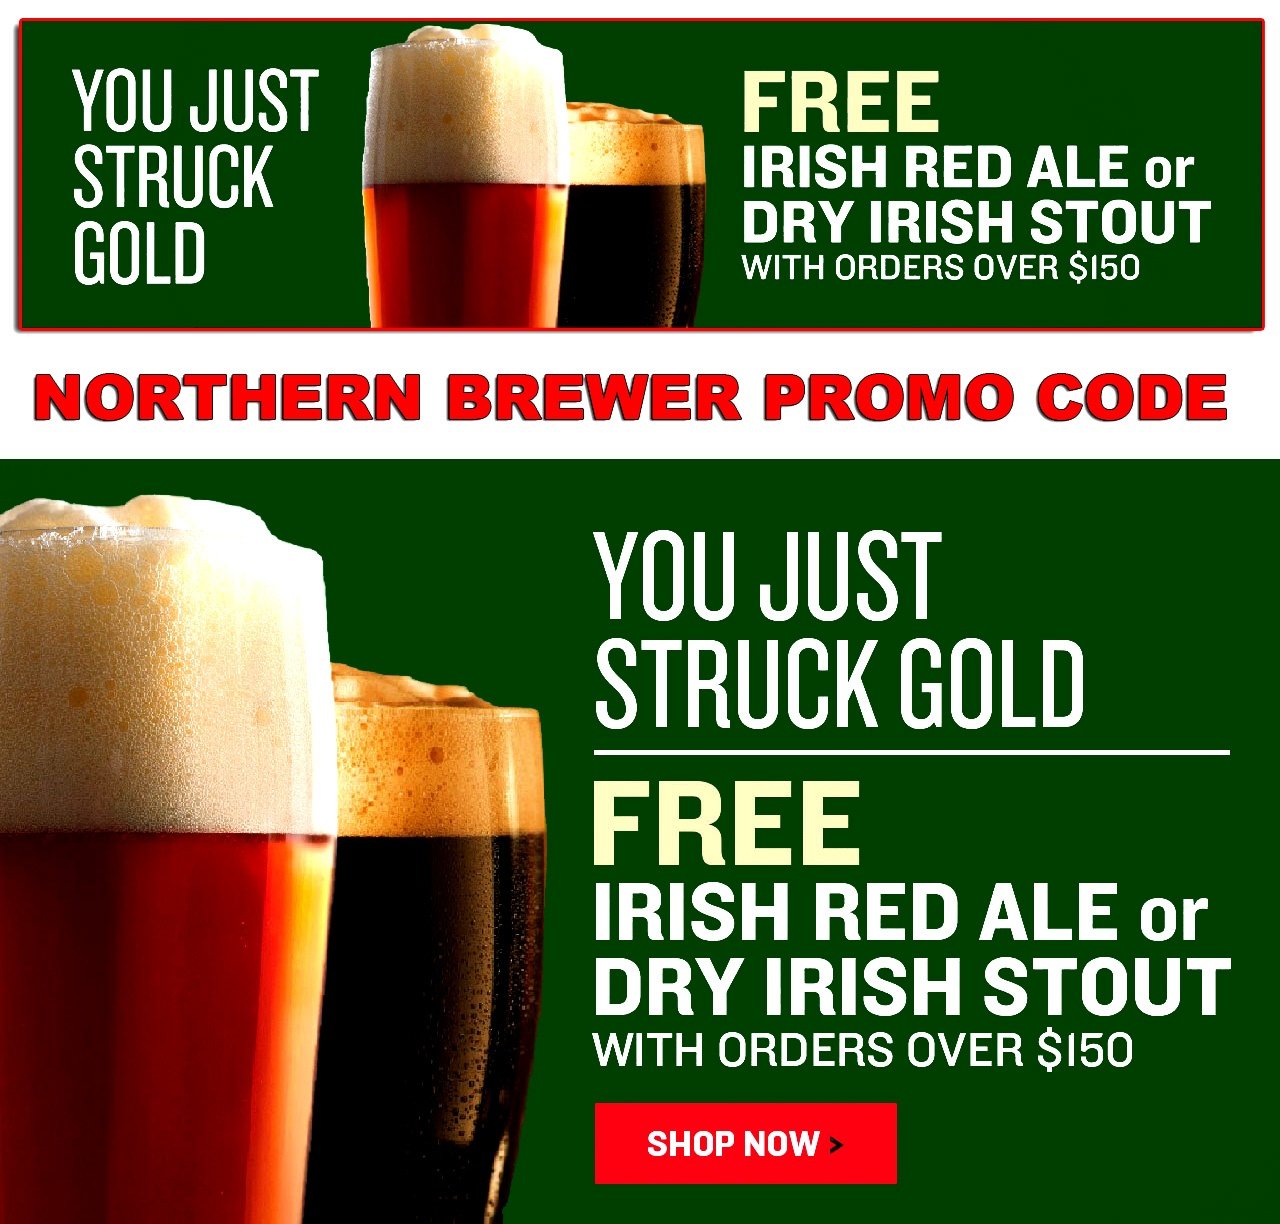 Use this Northern Brewer promo code for a free Irish Ale or Irish Stout Beer kit from NorthernBrewer.com